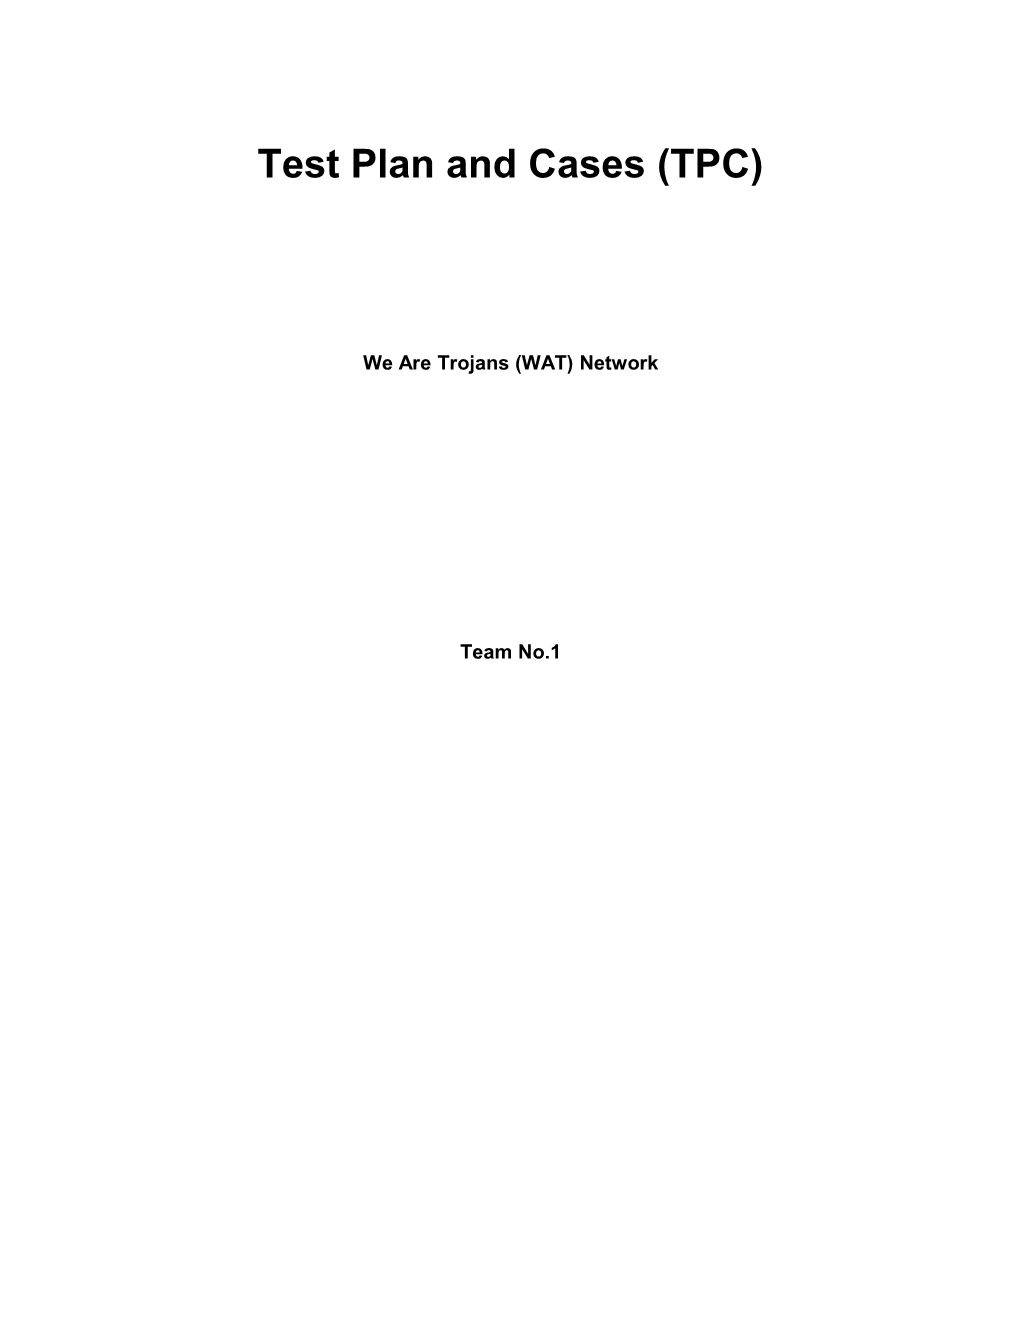 Test Plan and Cases (TPC) s6